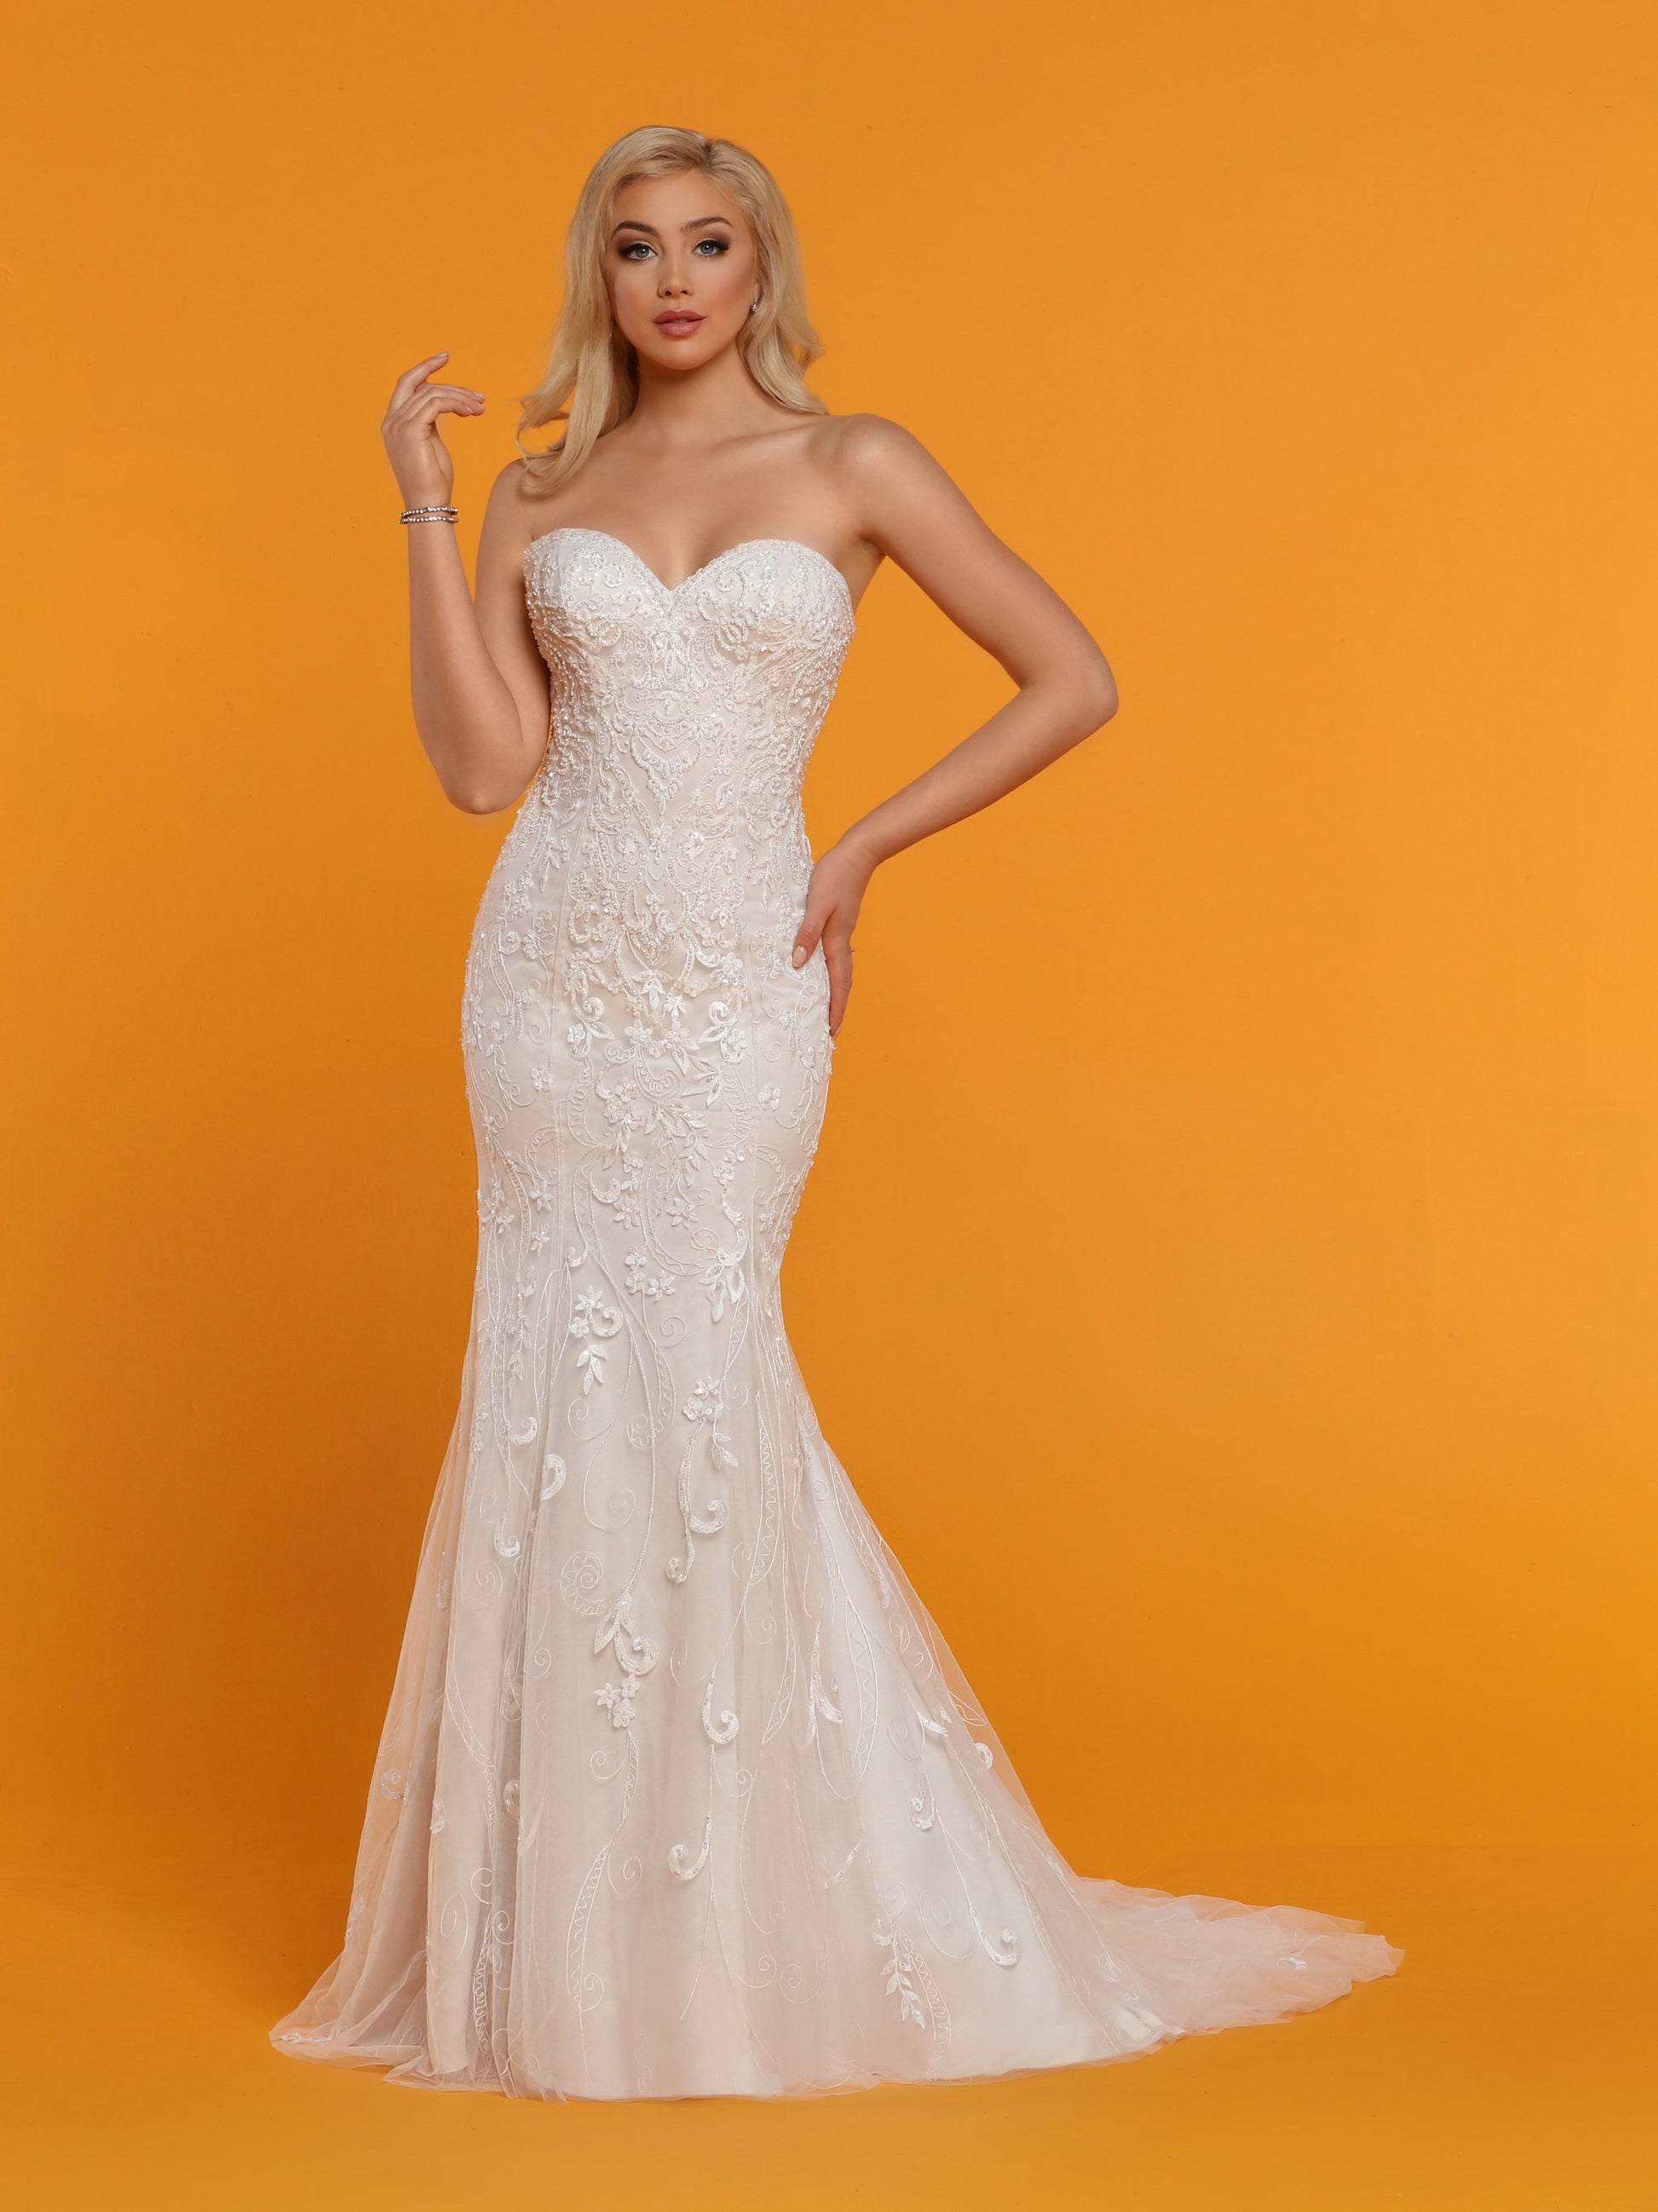 Davinci Bridal 50518 is a Fitted Fit & Flare Mermaid Wedding Dress. Detailed Embellishments & Lace along the Bodice & Sweetheart neckline, cascading into the skirt of the gown & Train in the back.  Available for 1-2 Week Delivery!!!  Available Sizes: 2,4,6,8,10,12,14,16,18,20  Available Colors: Ivory/Sand, Ivory/Ivory